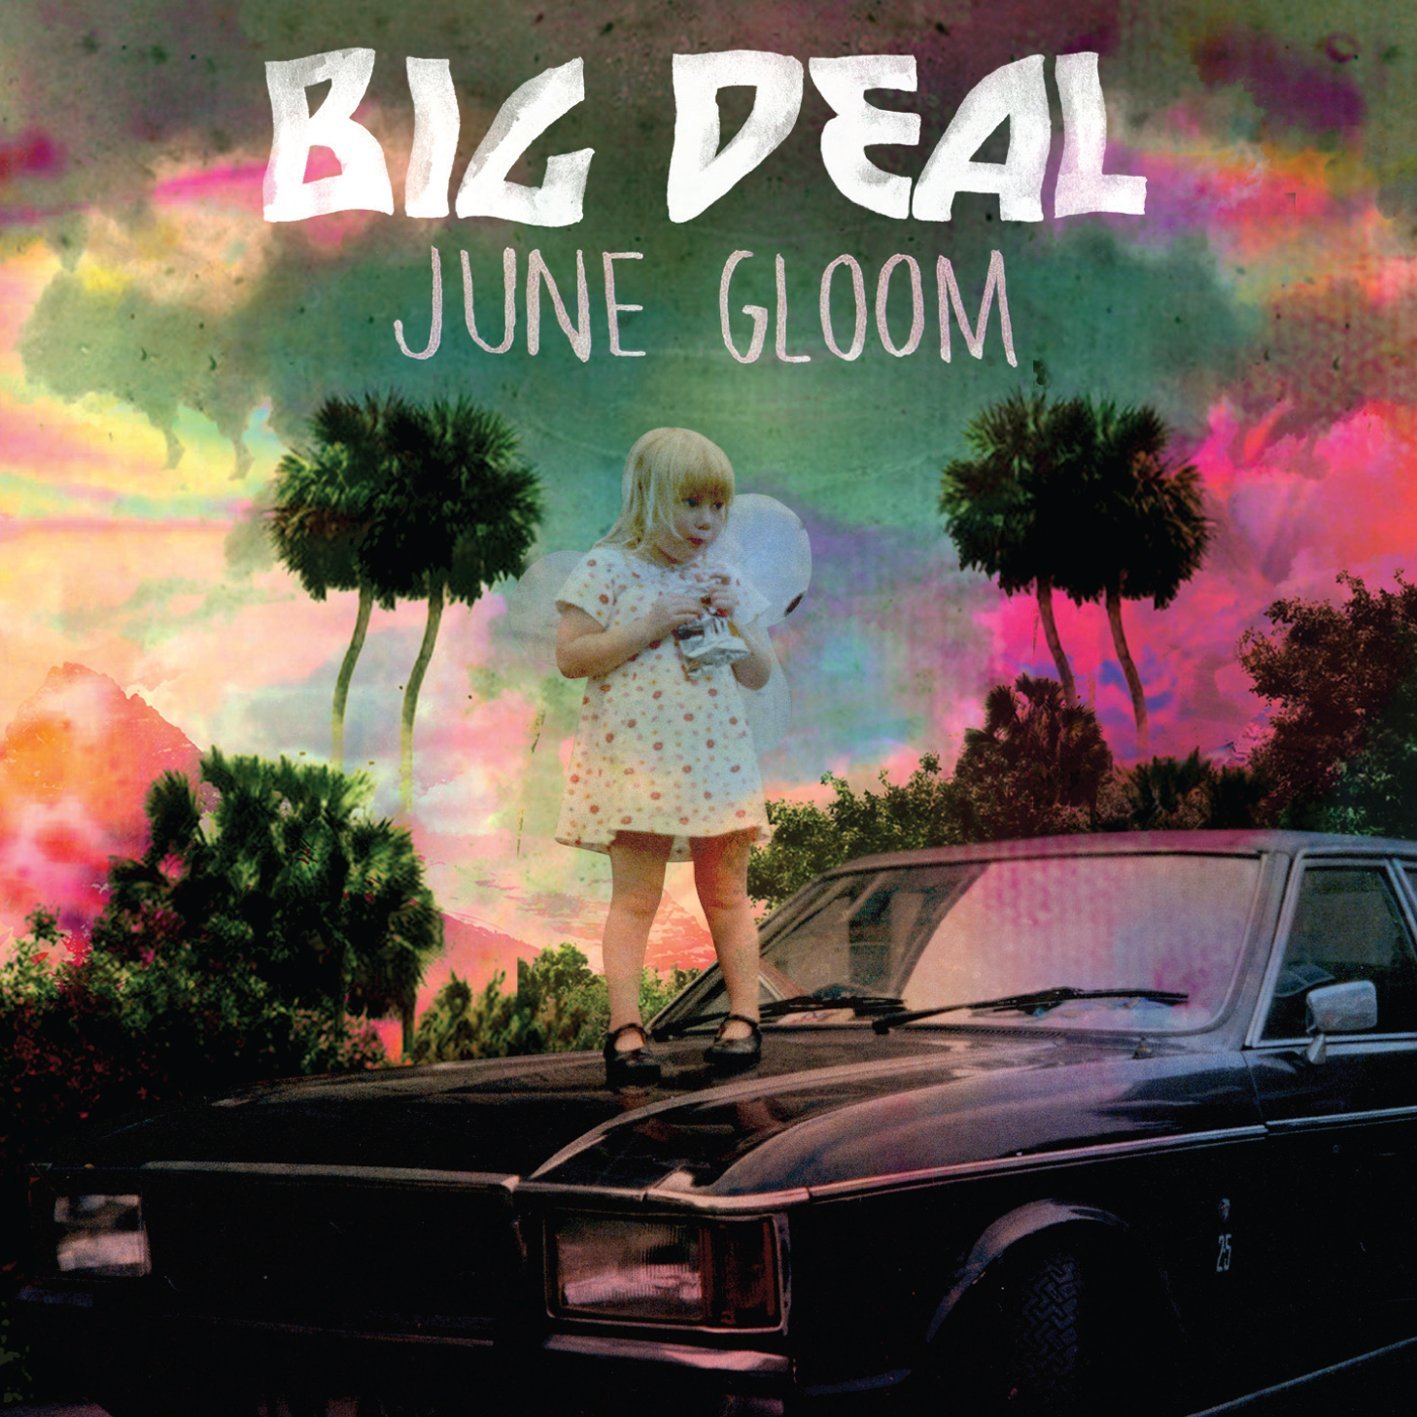 "June Gloom" by Big Deal reviewed by Northern Transmissions